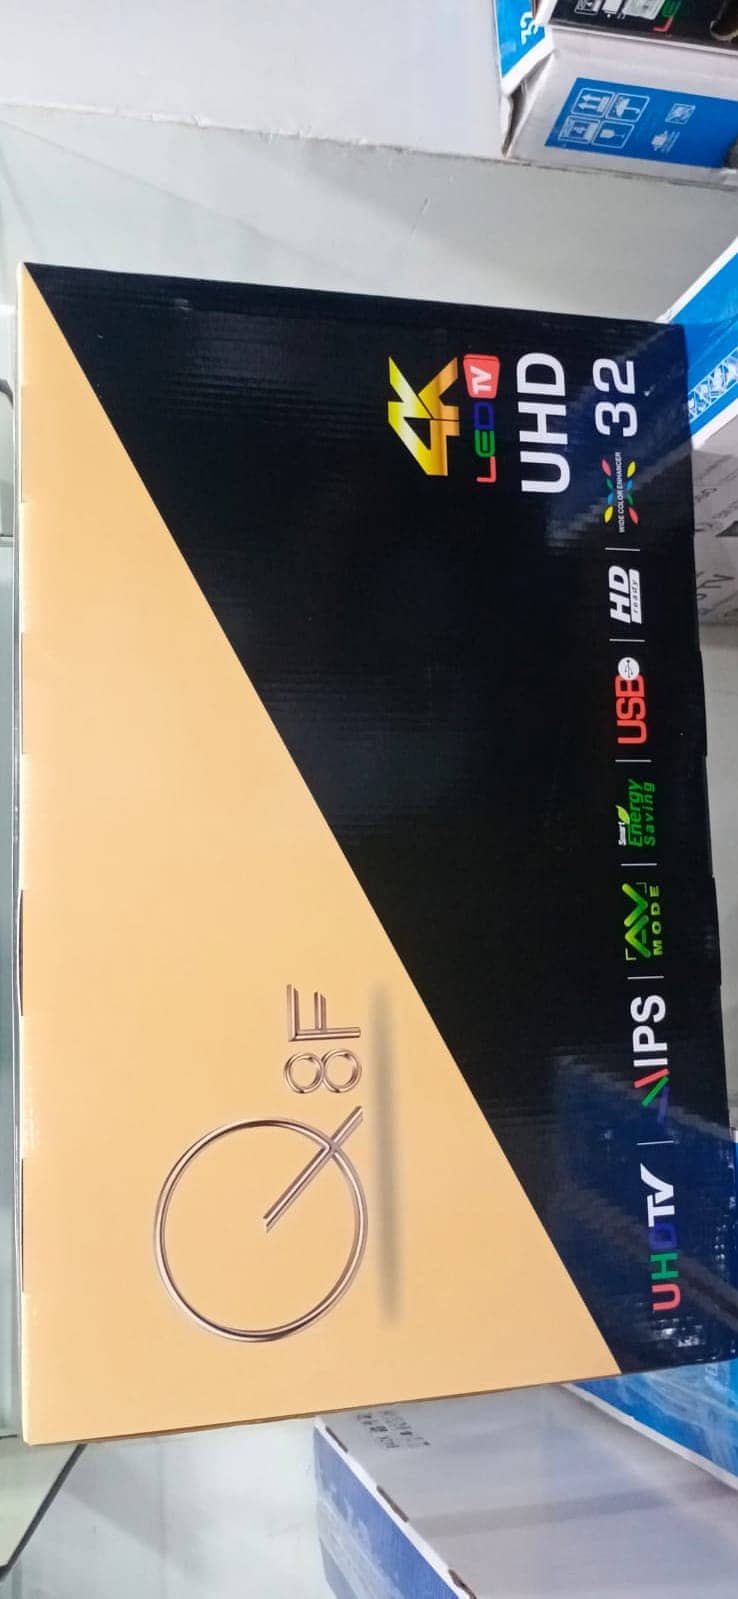 32 inch Smart LED TV NEw Box Pack made in malyisa 1 year warranty 12